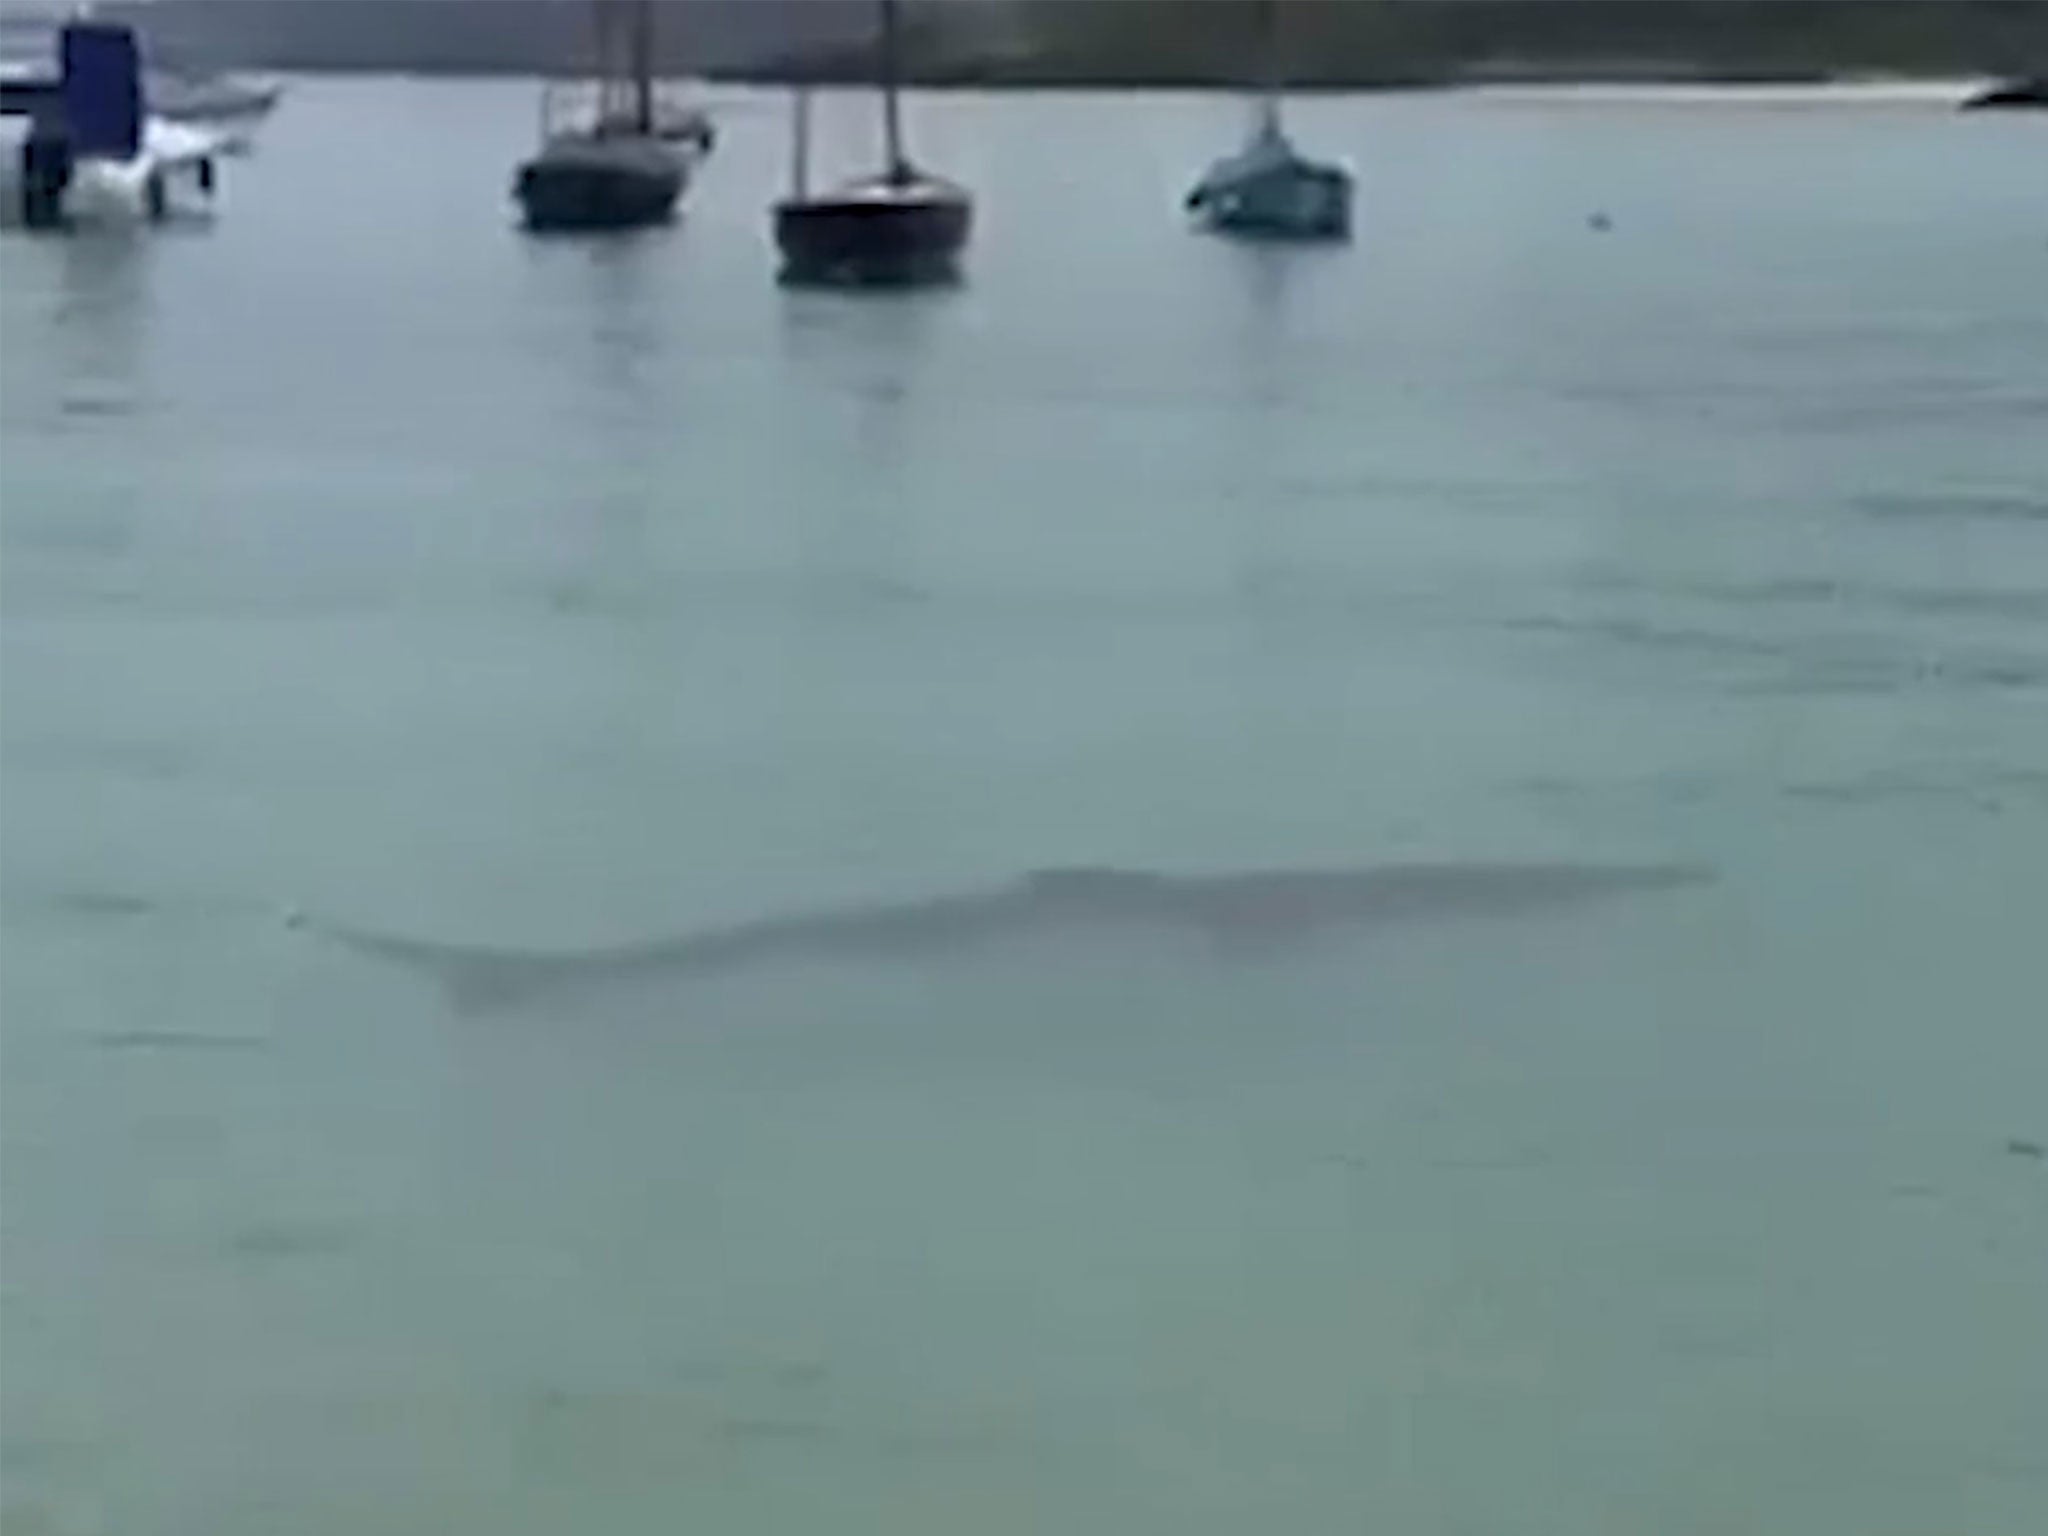 Shark spotted metres from shore in Cornwall